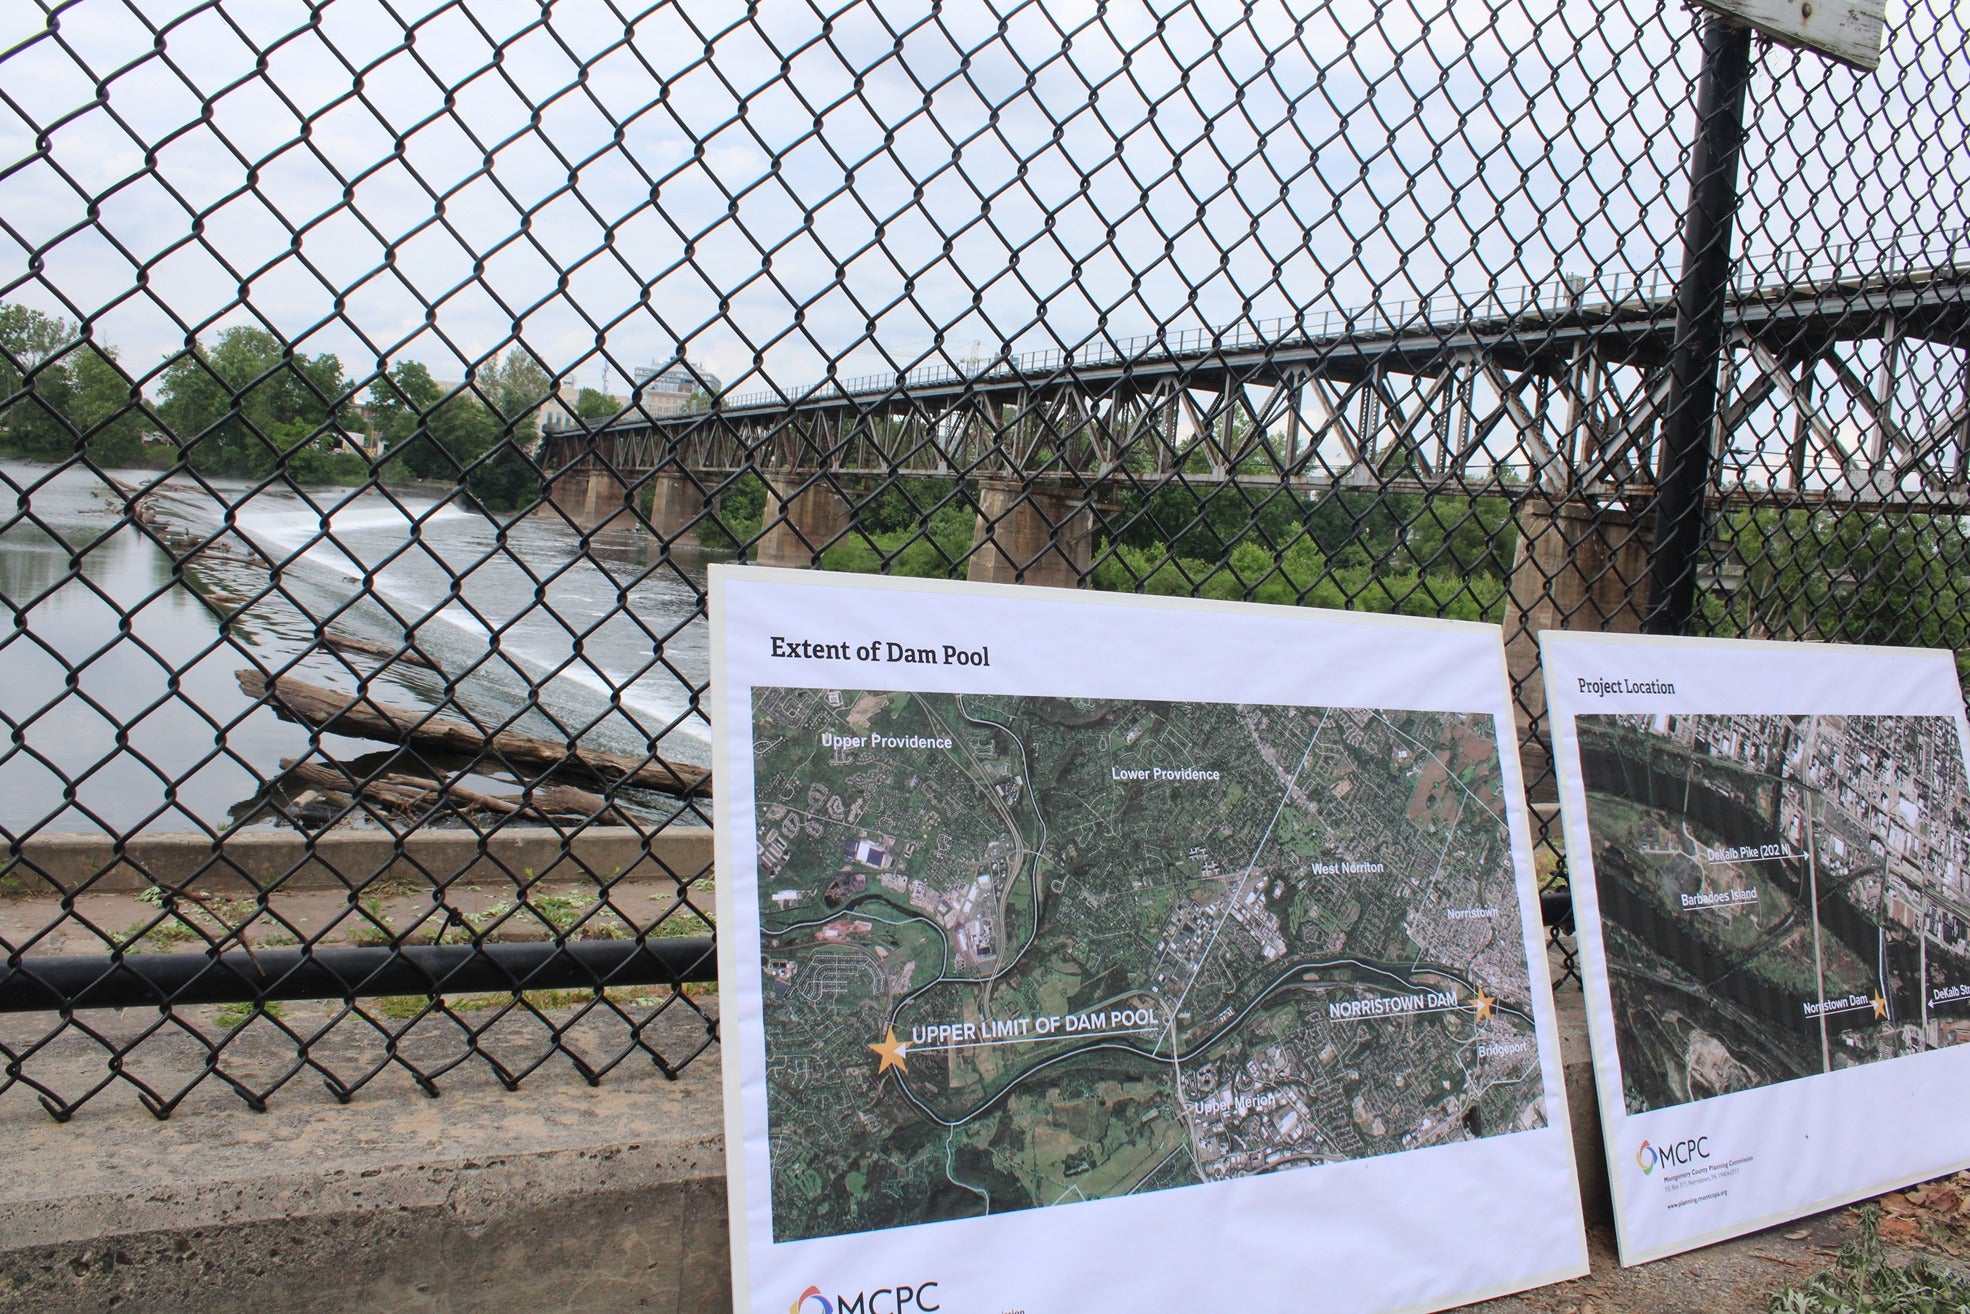 the Schuylkill River and images of the propsed dam